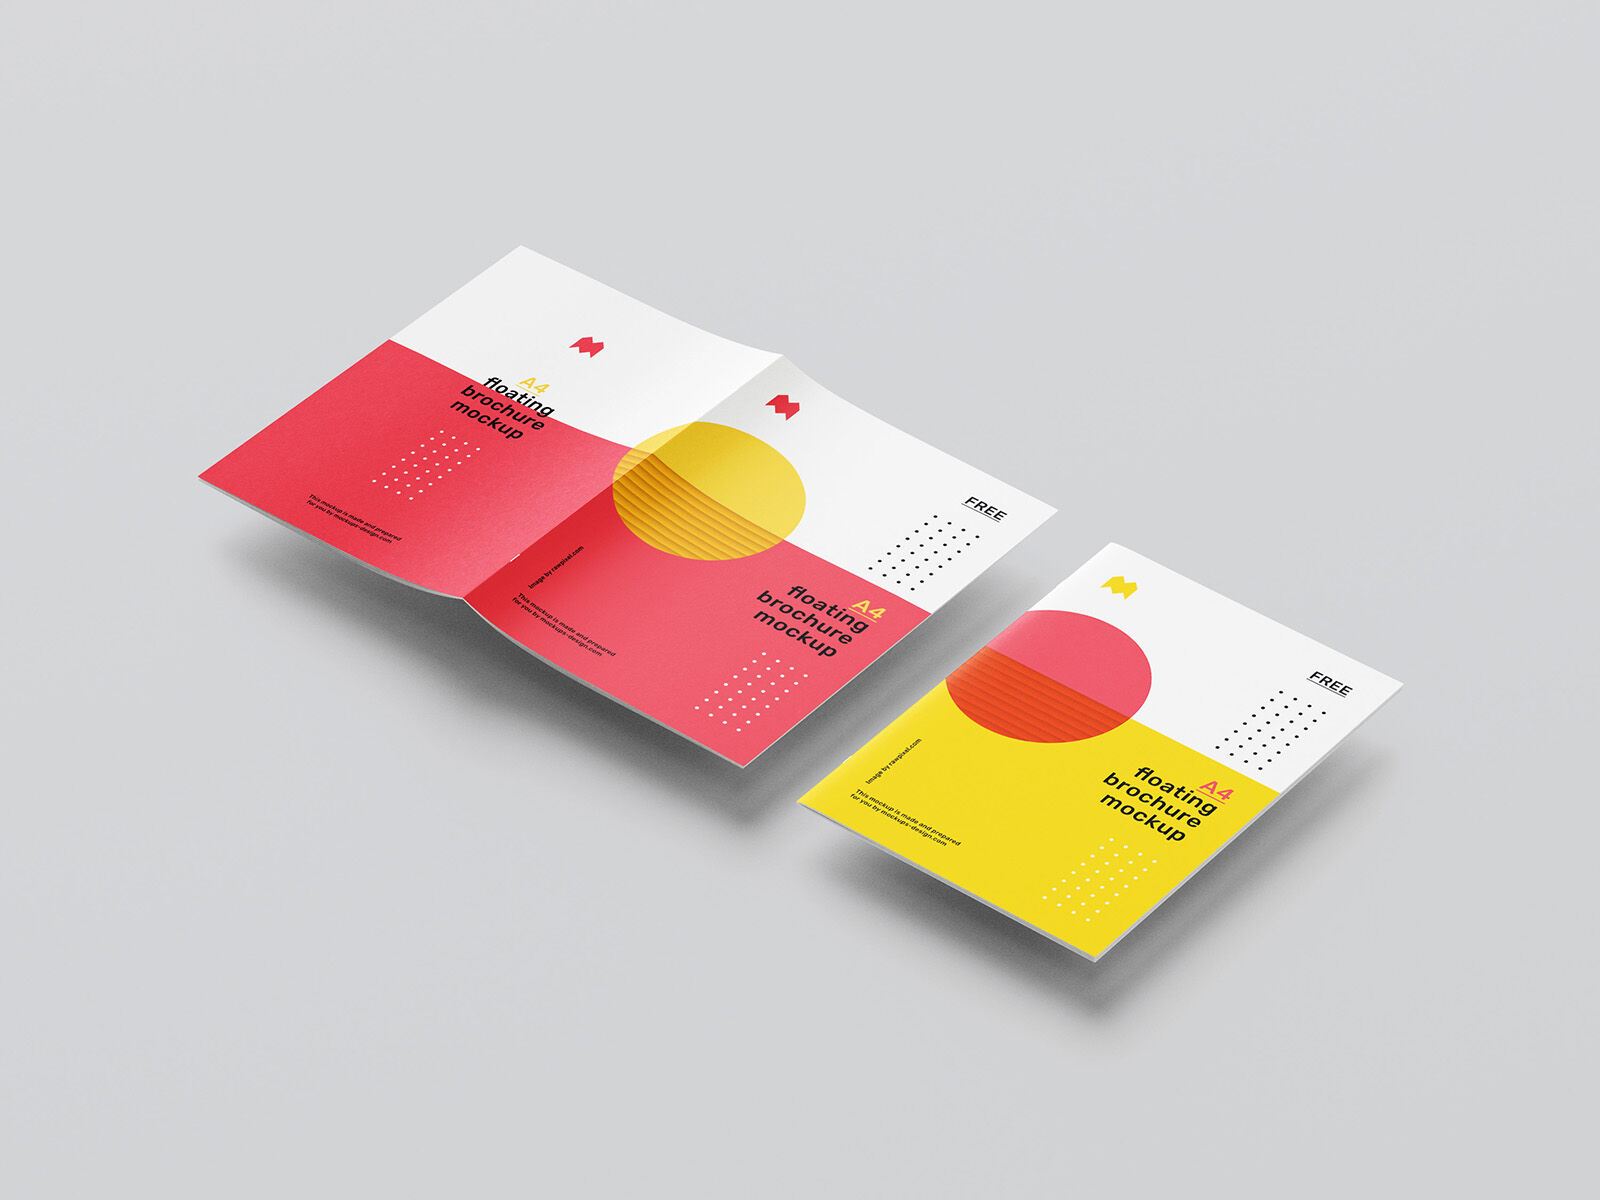 7 Mockups Featuring Floating A4 Brochure Booklet in Different Views FREE PSD